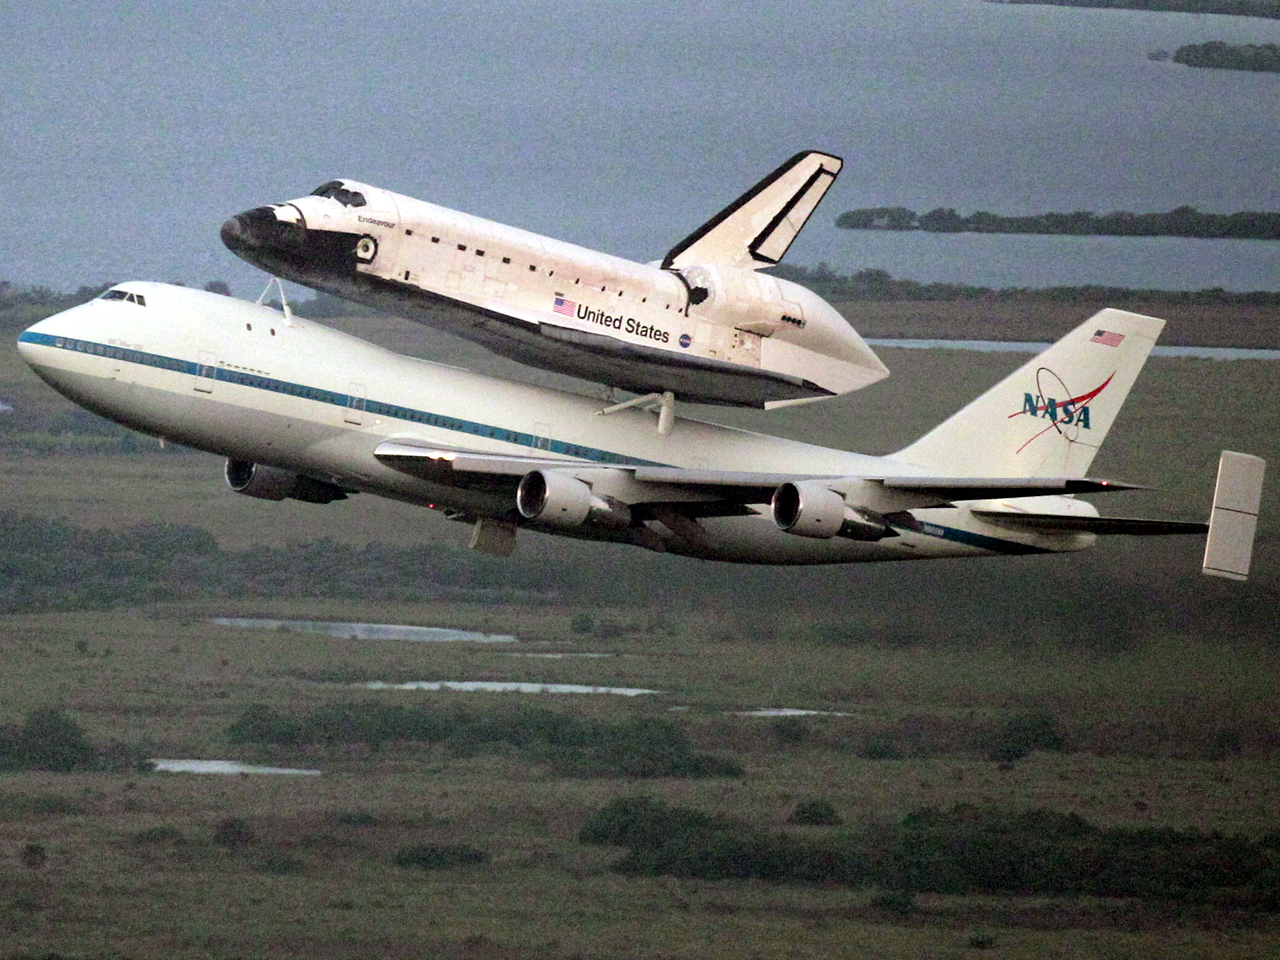 the endeavour space shuttle